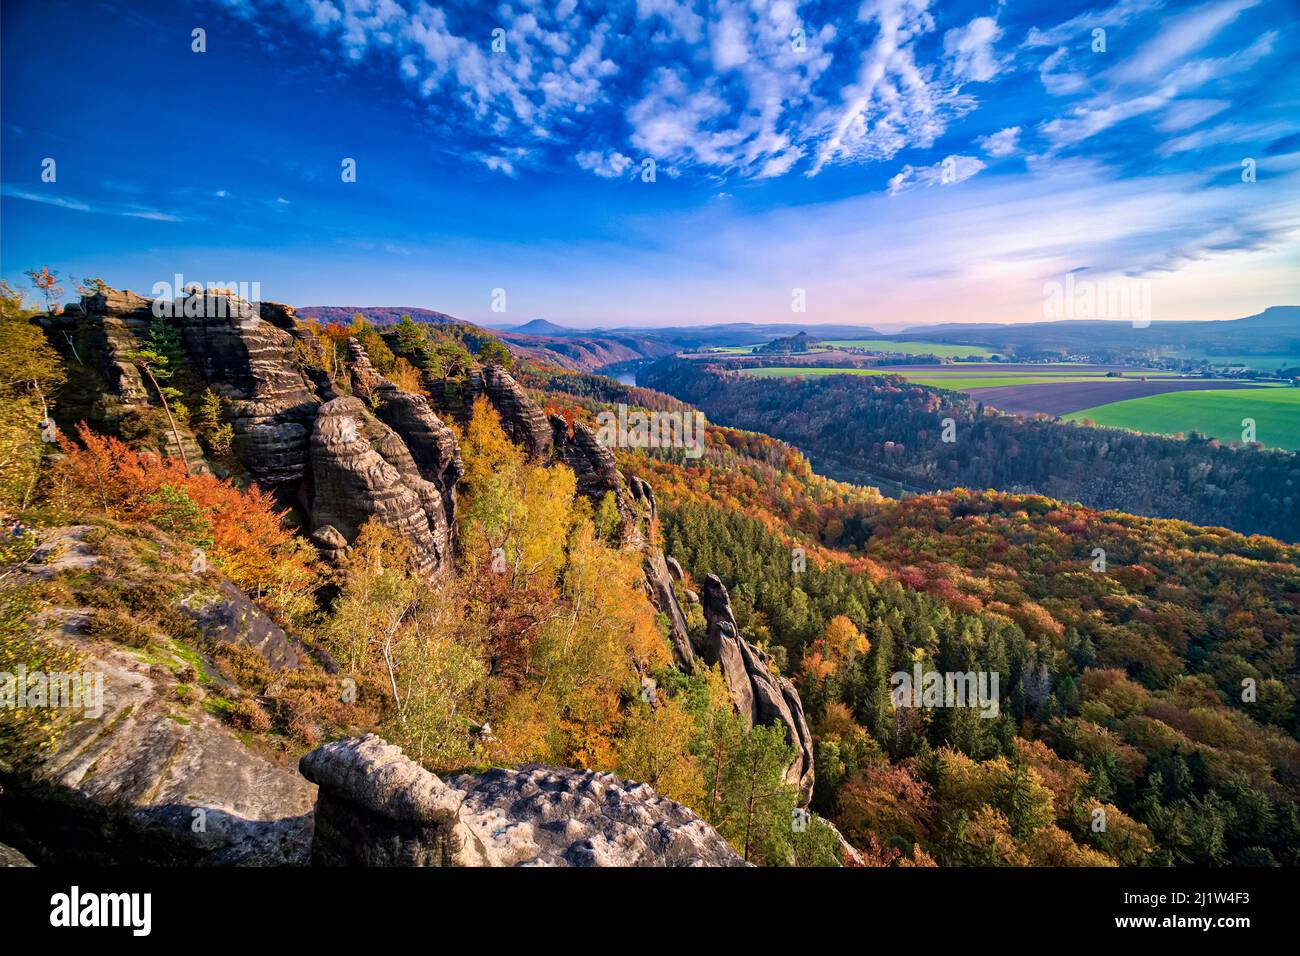 Landscape with rock formations, colorful trees and the Elbe valley in Schrammsteine area of the Saxon Switzerland National Park in autumn. Stock Photo